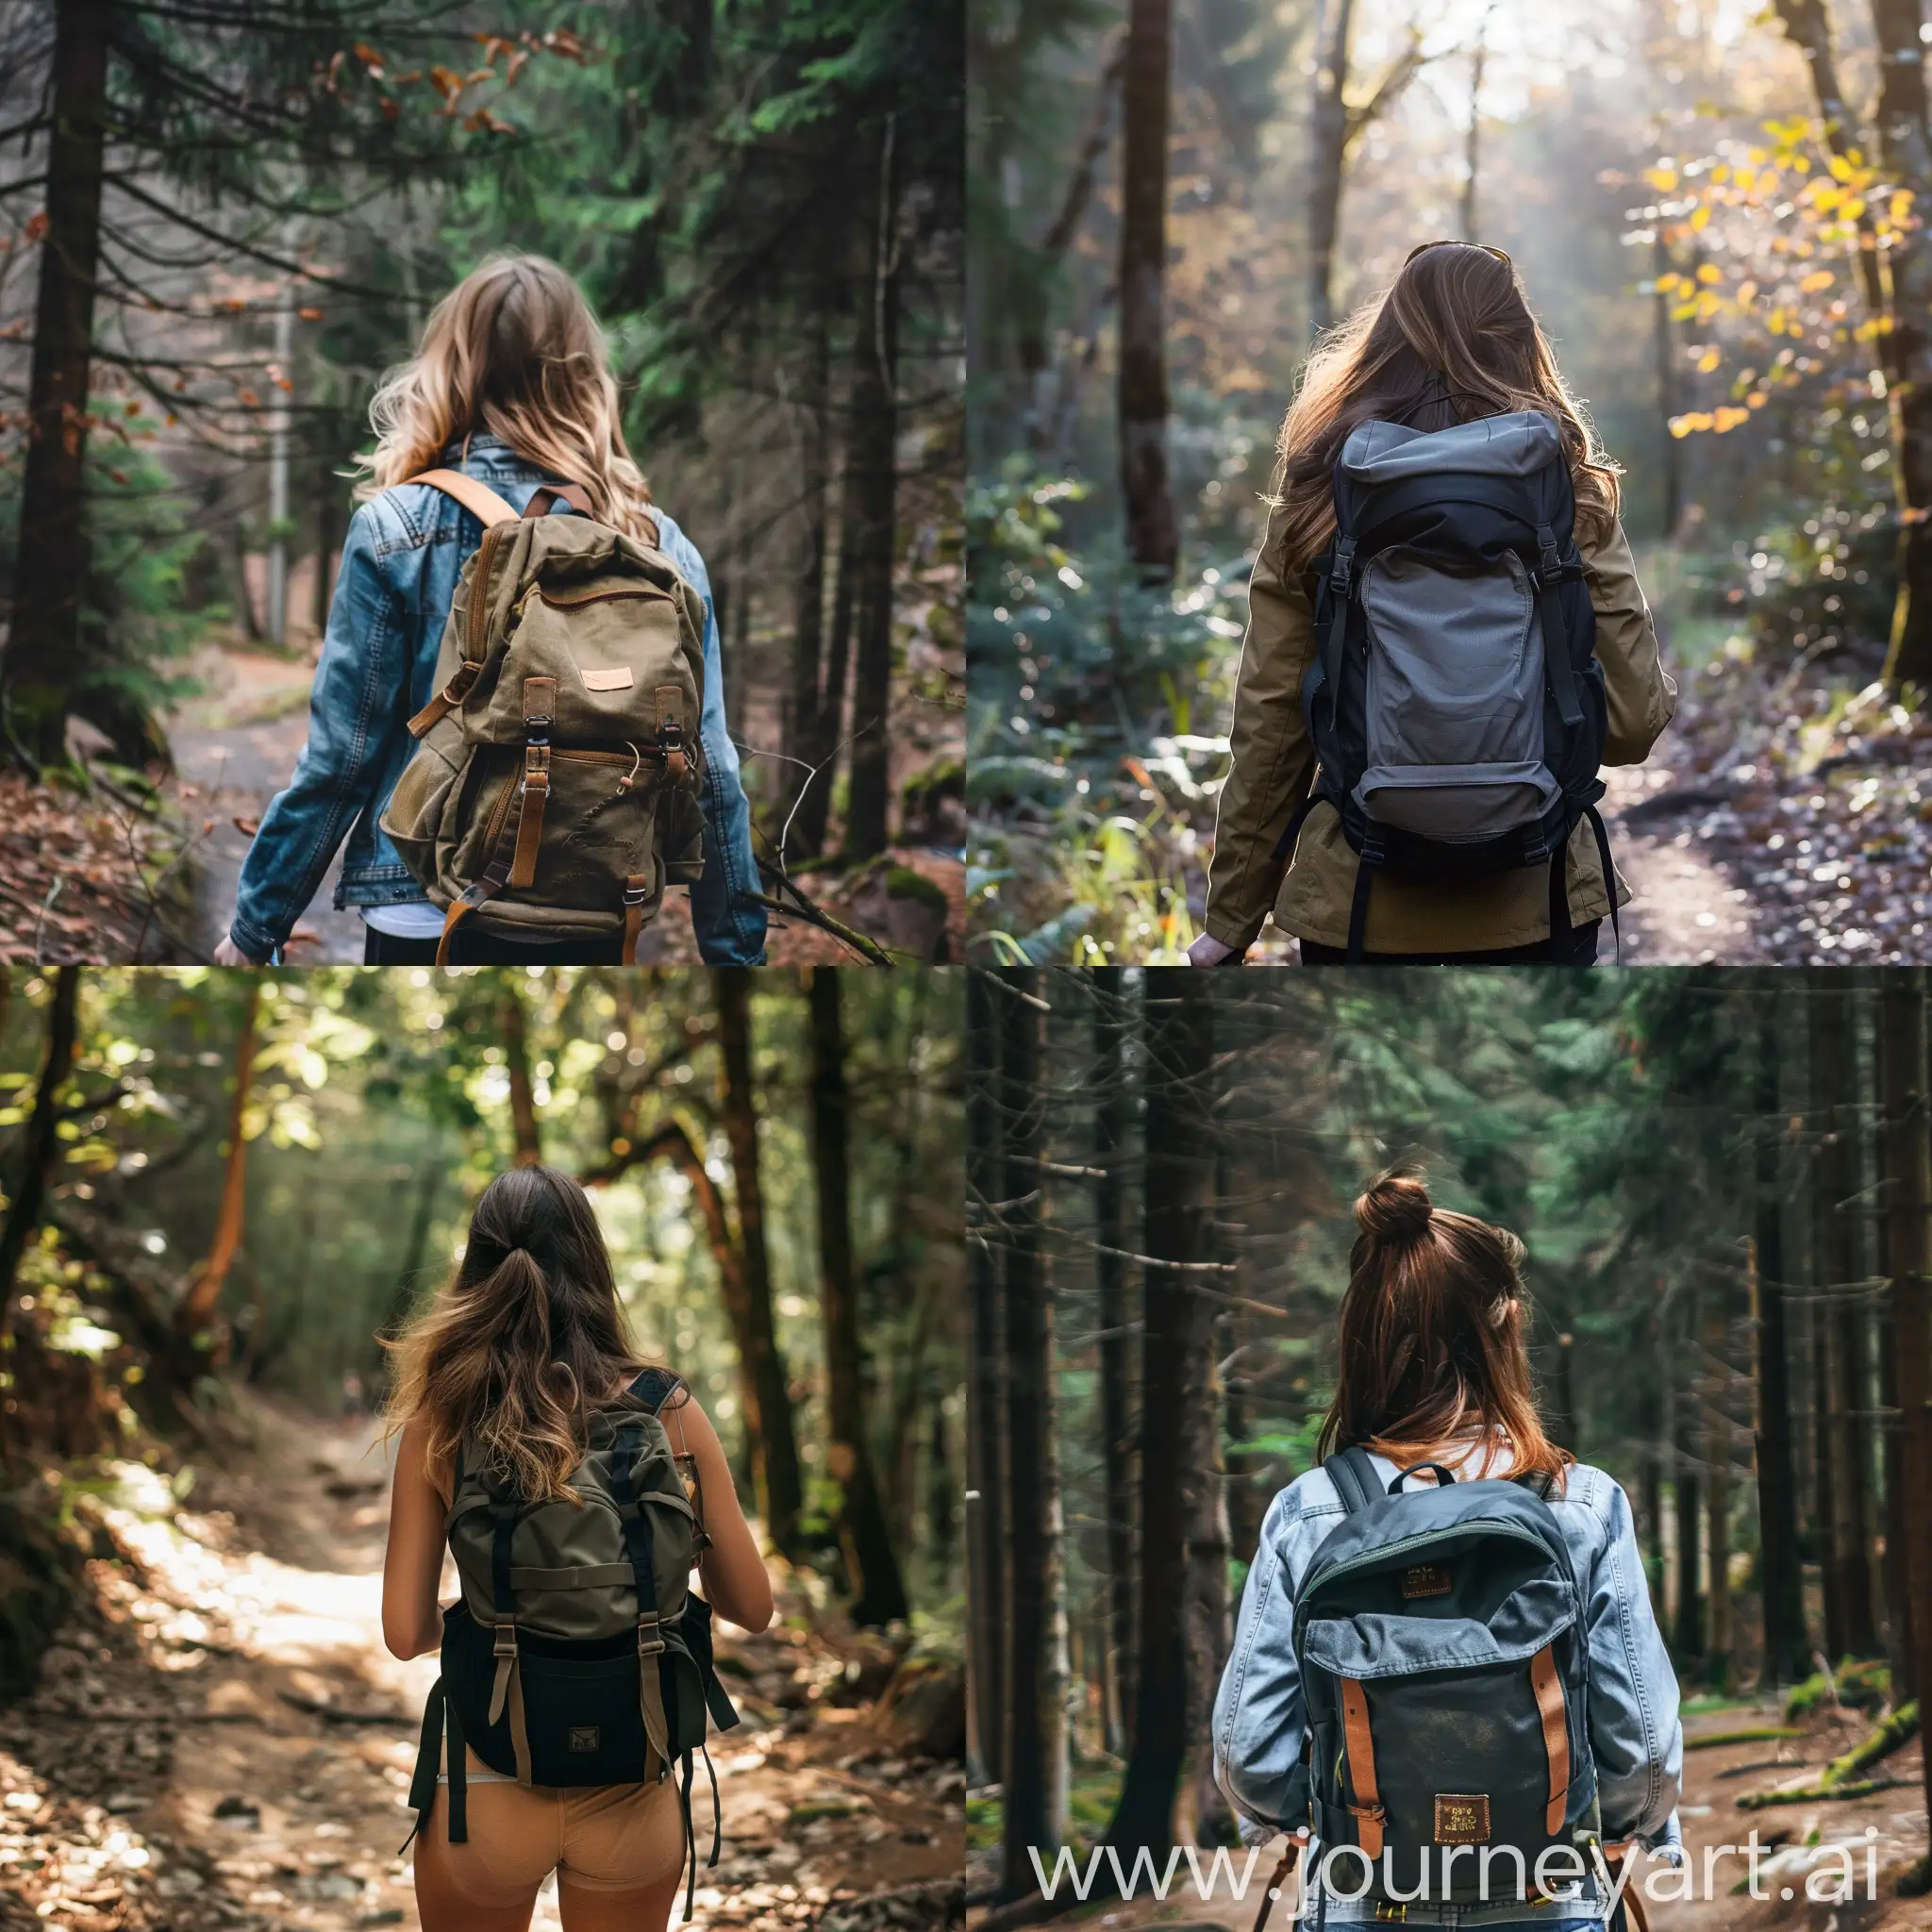 Young-Woman-Trekking-in-Woods-Amidst-Vibrant-Foliage